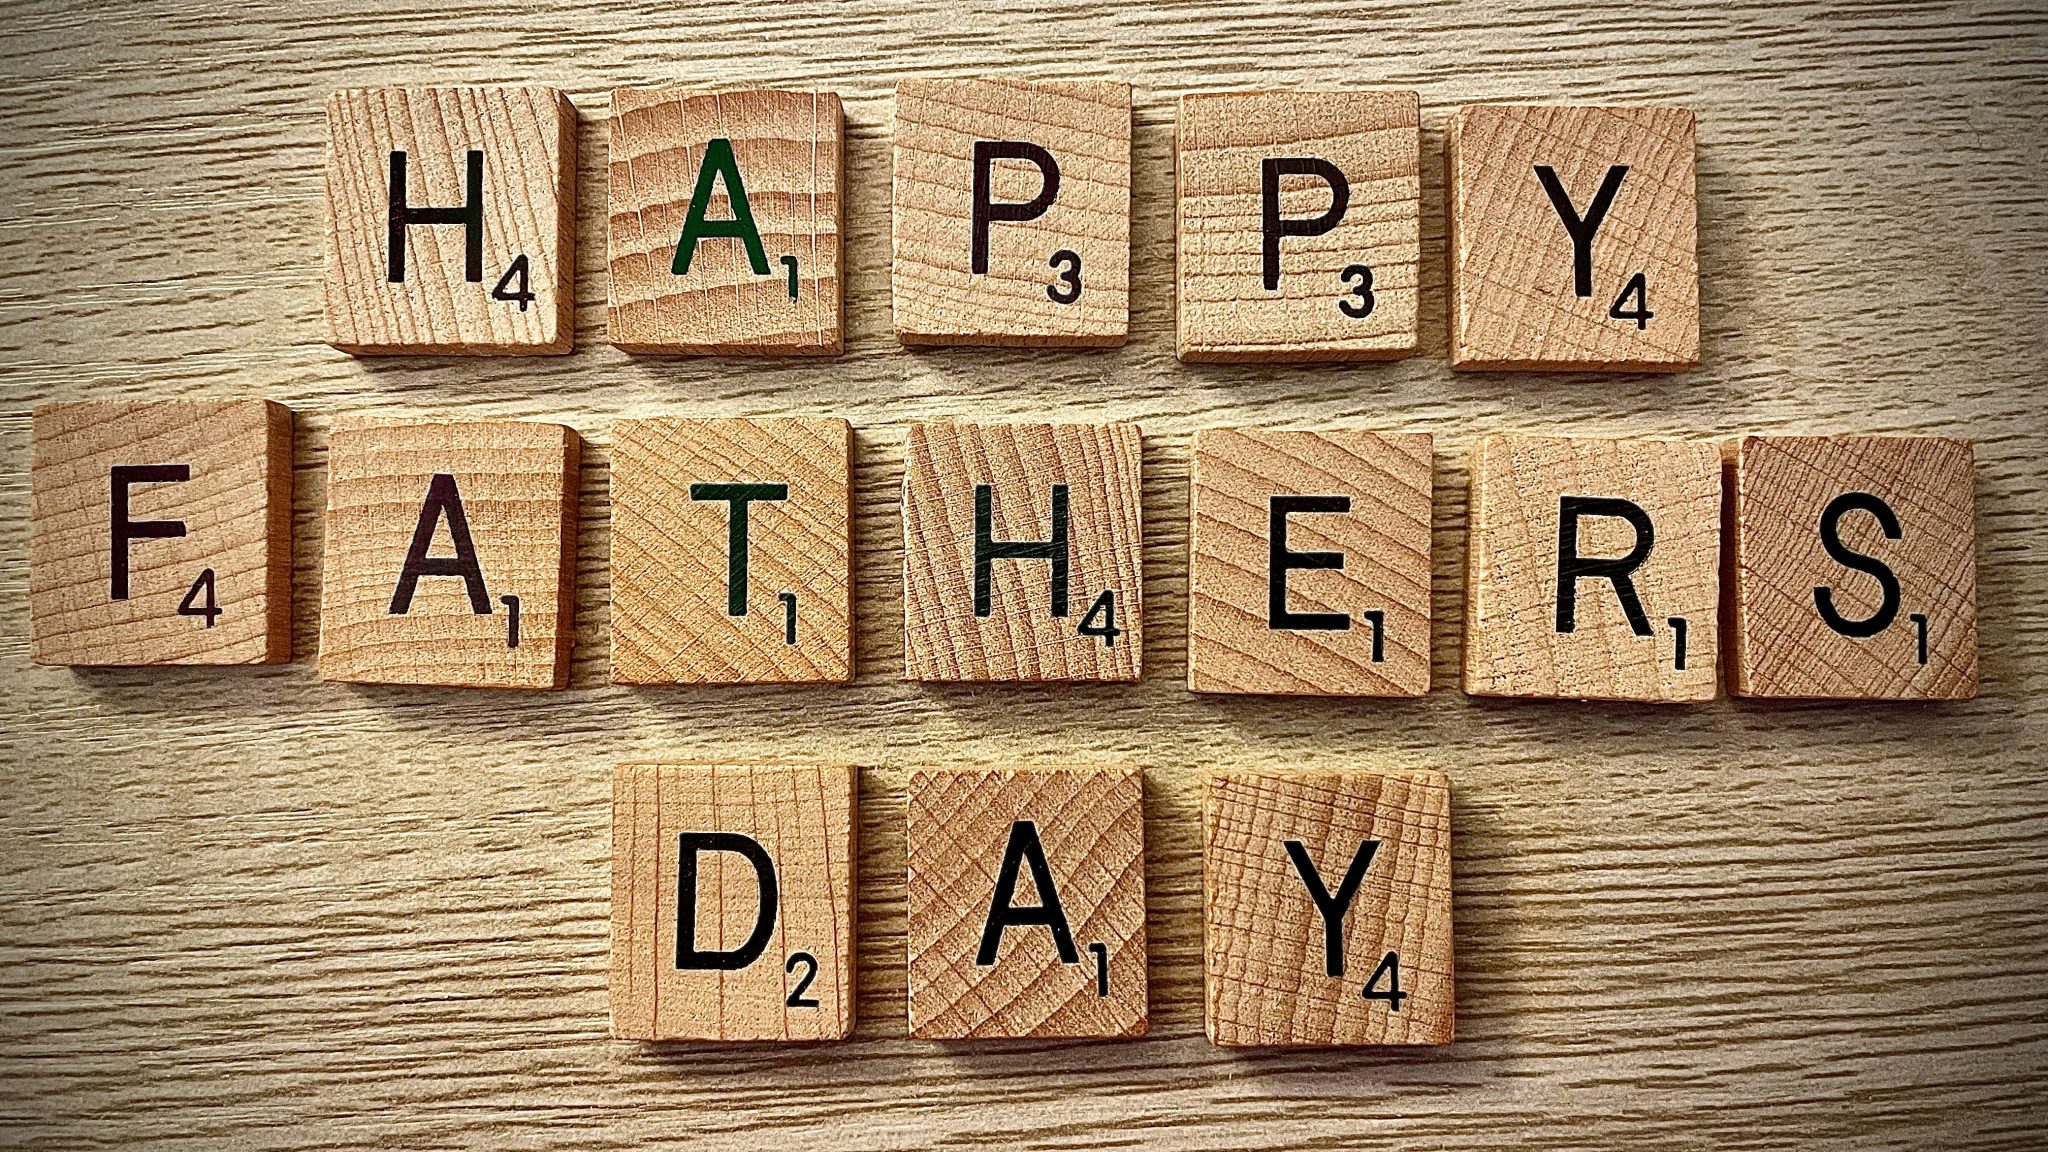 Wooden blocks with letters printed on them that spell out happy fathers day